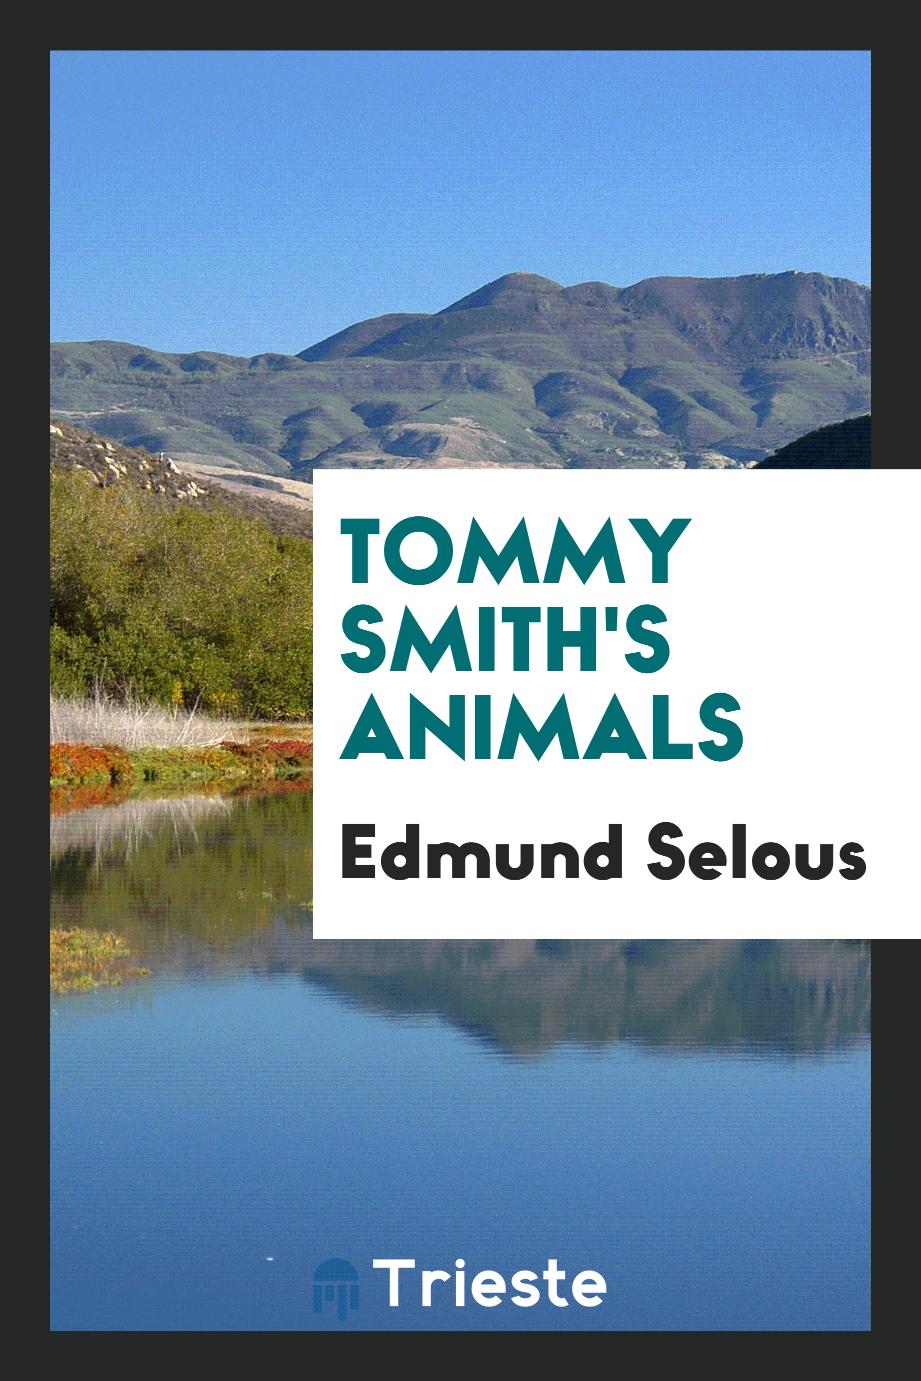 Tommy Smith's animals